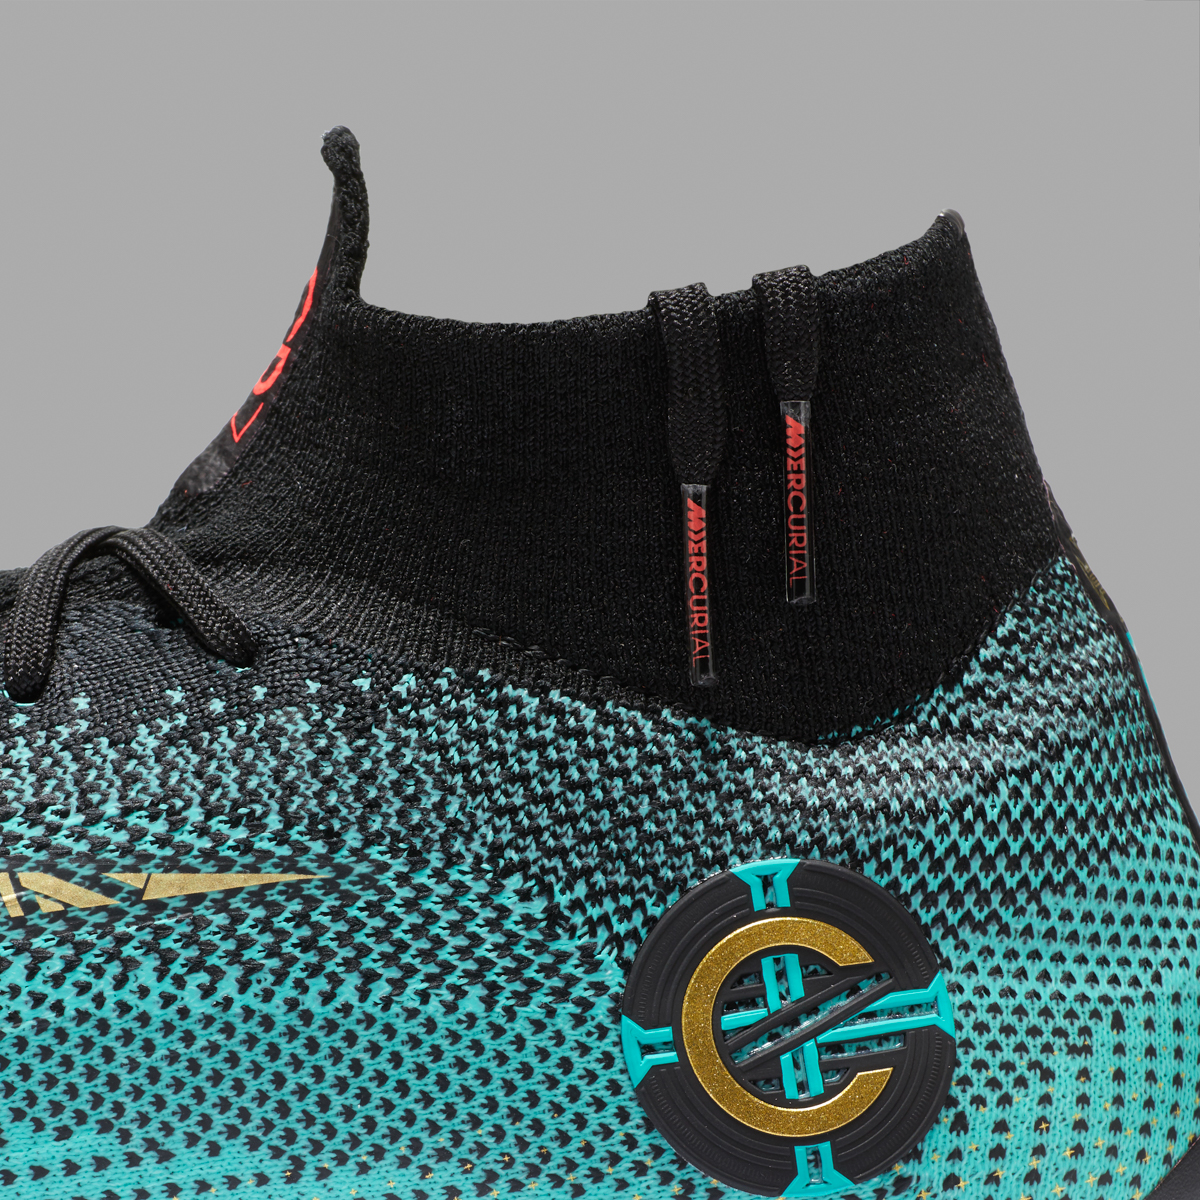 Nike Mercurial Superfly 360 CR7 Chapter 6